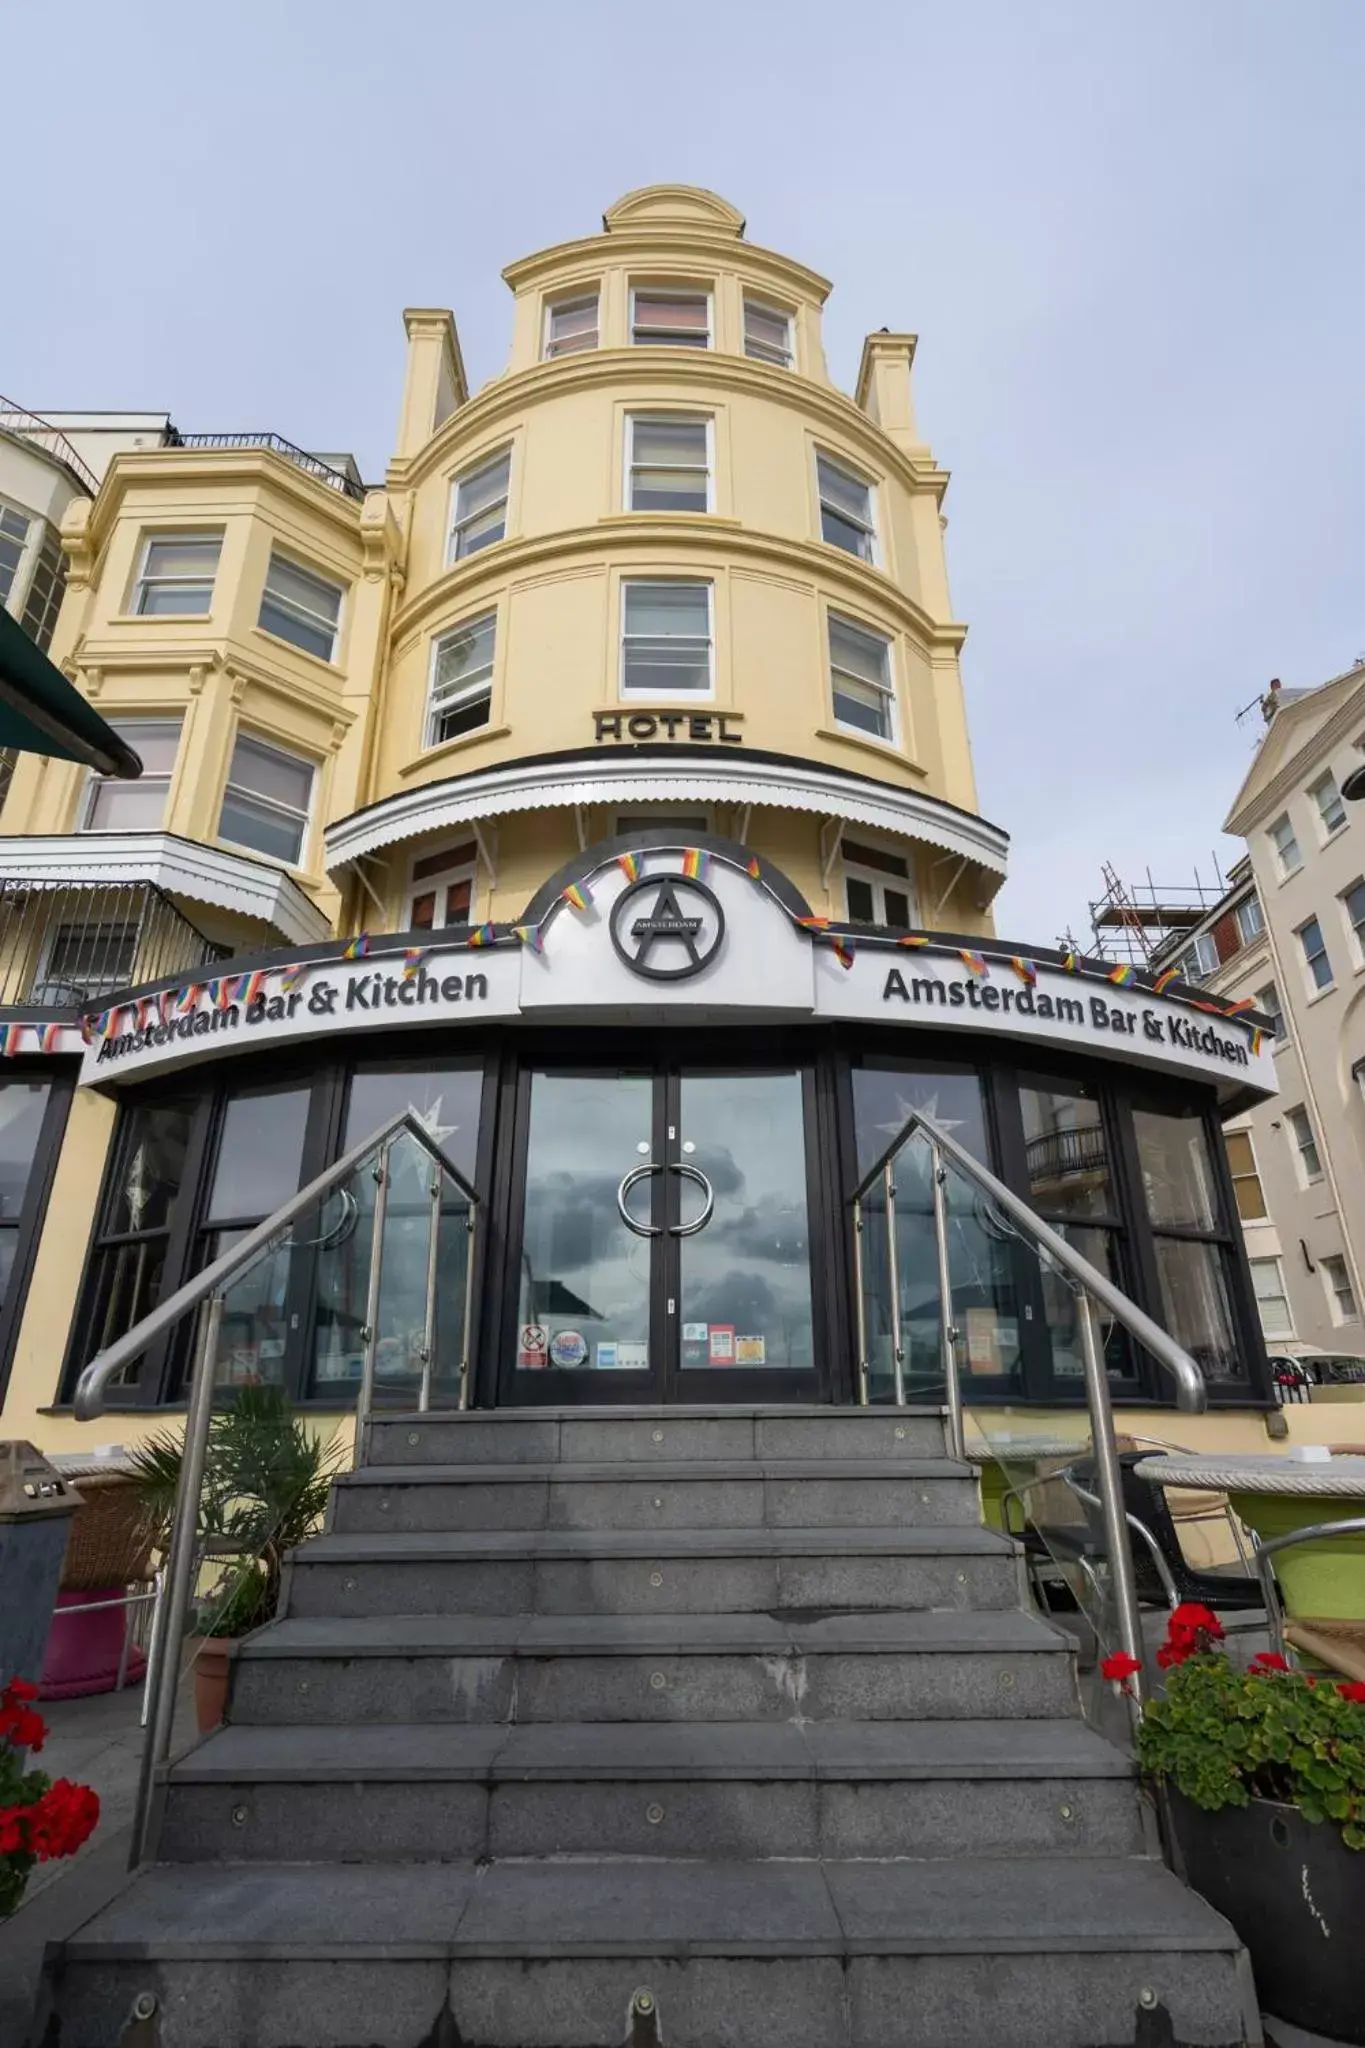 Bird's eye view, Property Building in Amsterdam Hotel Brighton Seafront